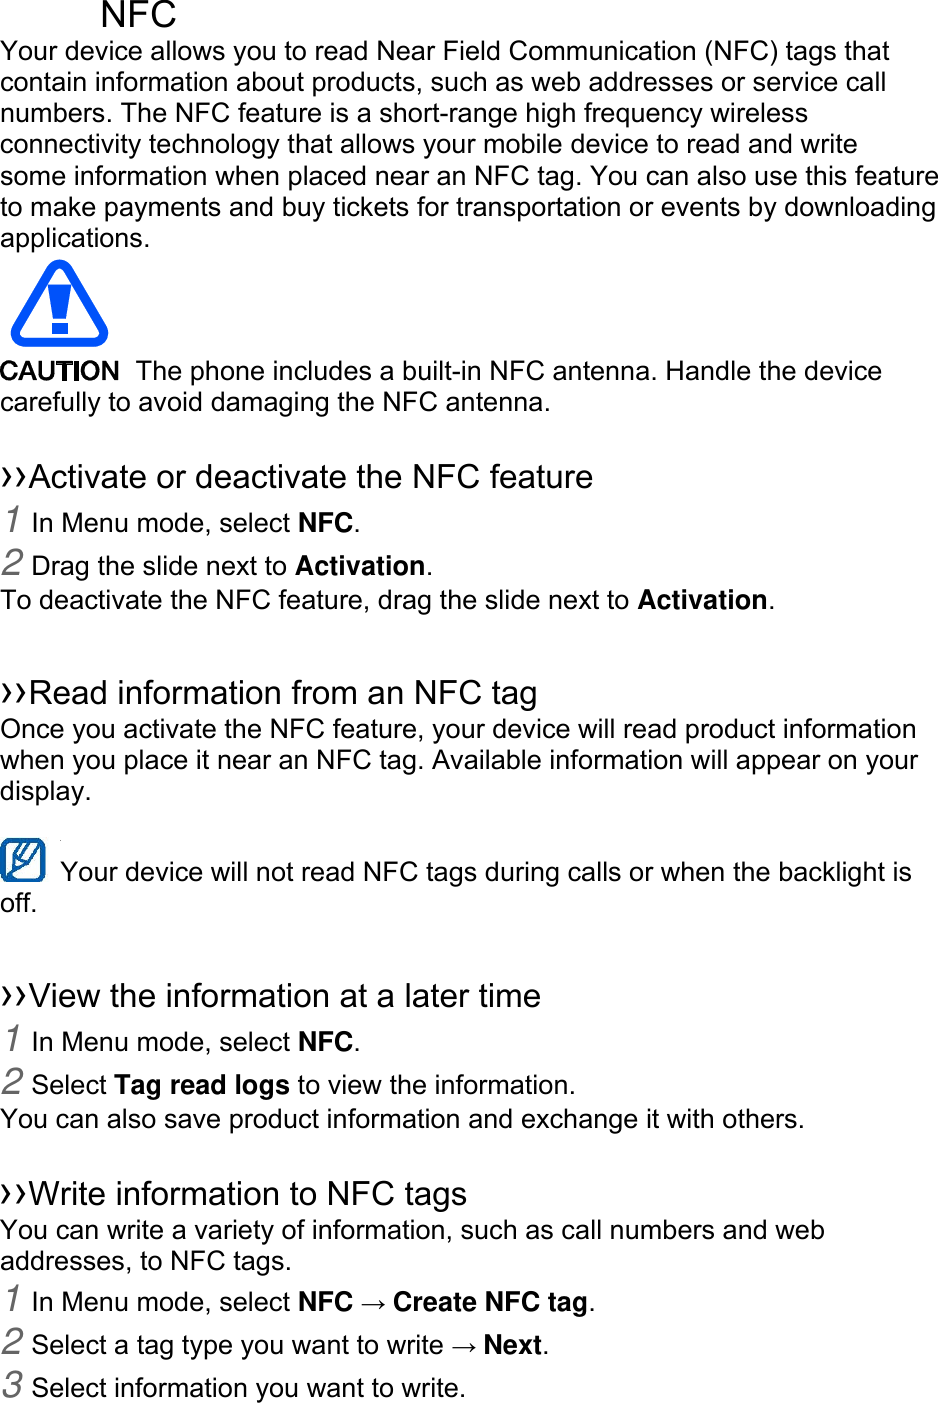  NFC Your device allows you to read Near Field Communication (NFC) tags that contain information about products, such as web addresses or service call numbers. The NFC feature is a short-range high frequency wireless connectivity technology that allows your mobile device to read and write some information when placed near an NFC tag. You can also use this feature to make payments and buy tickets for transportation or events by downloading applications.    The phone includes a built-in NFC antenna. Handle the device carefully to avoid damaging the NFC antenna. ››Activate or deactivate the NFC feature1 In Menu mode, select NFC.2 Drag the slide next to Activation.To deactivate the NFC feature, drag the slide next to Activation. ››Read information from an NFC tagOnce you activate the NFC feature, your device will read product information when you place it near an NFC tag. Available information will appear on your display. Your device will not read NFC tags during calls or when the backlight is off. ››View the information at a later time1 In Menu mode, select NFC.2 Select Tag read logs to view the information.You can also save product information and exchange it with others. ››Write information to NFC tagsYou can write a variety of information, such as call numbers and web addresses, to NFC tags. 1 In Menu mode, select NFC → Create NFC tag.2 Select a tag type you want to write → Next.3 Select information you want to write.